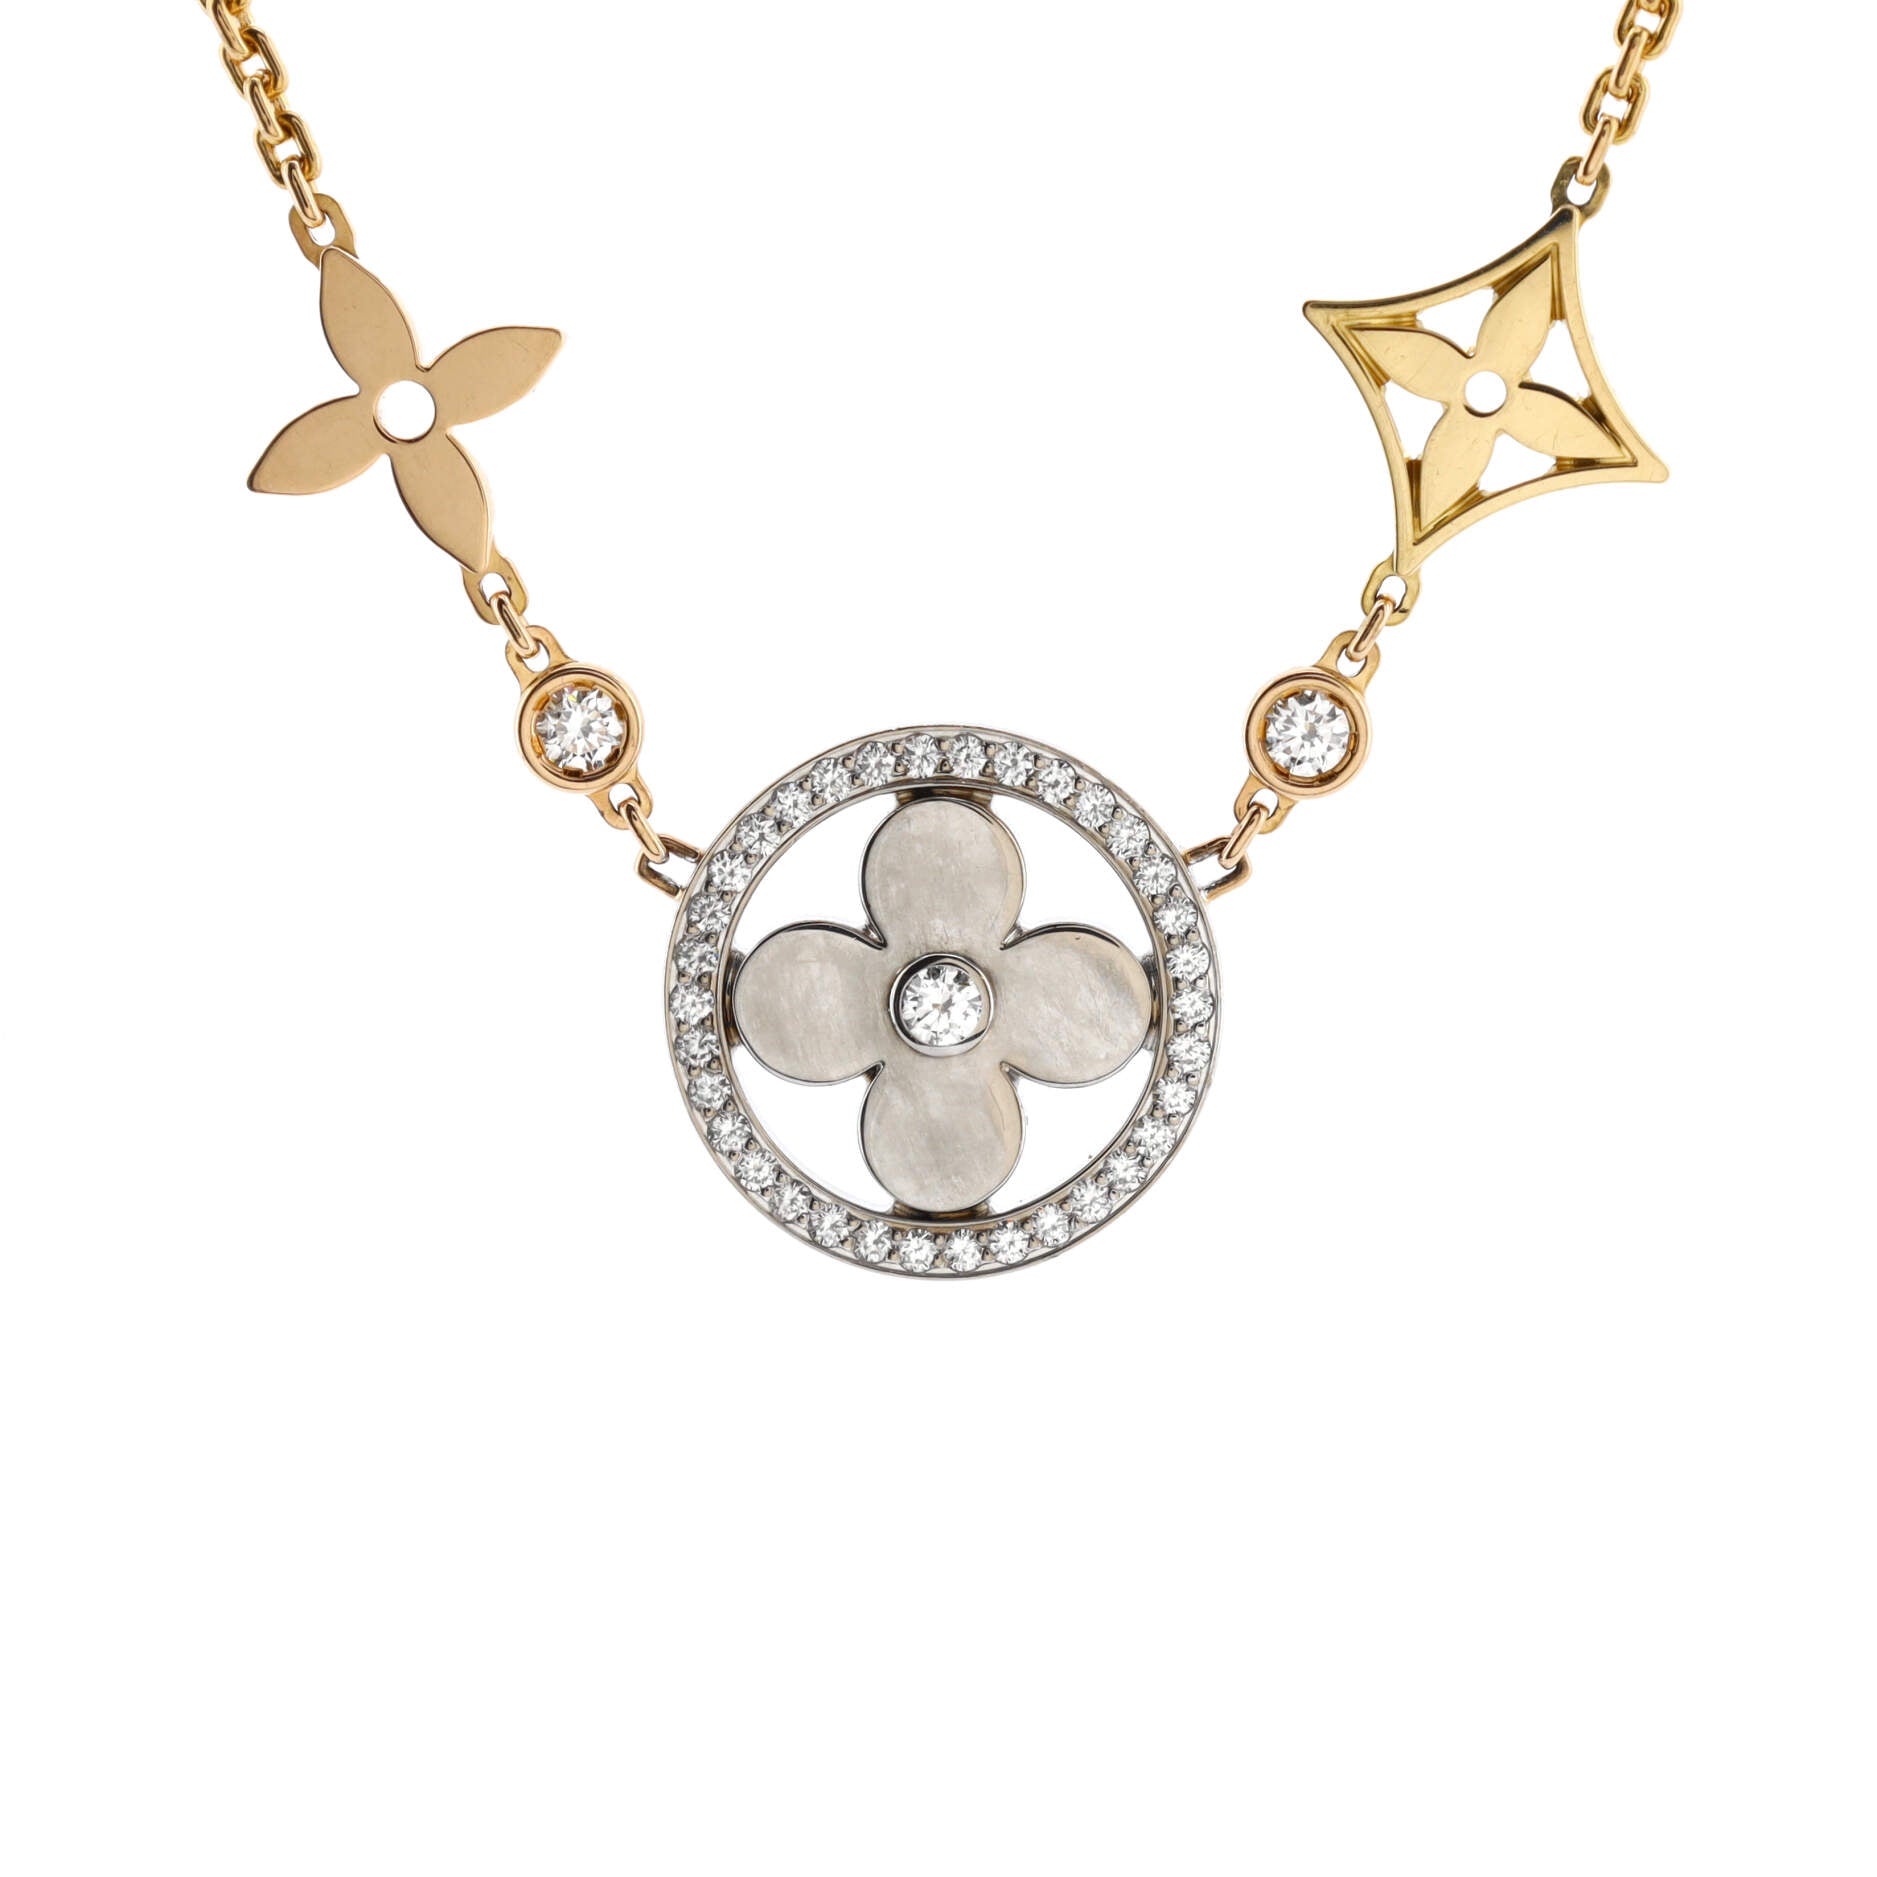 Products by Louis Vuitton: Idylle Blossom Charms Necklace, 3 Golds